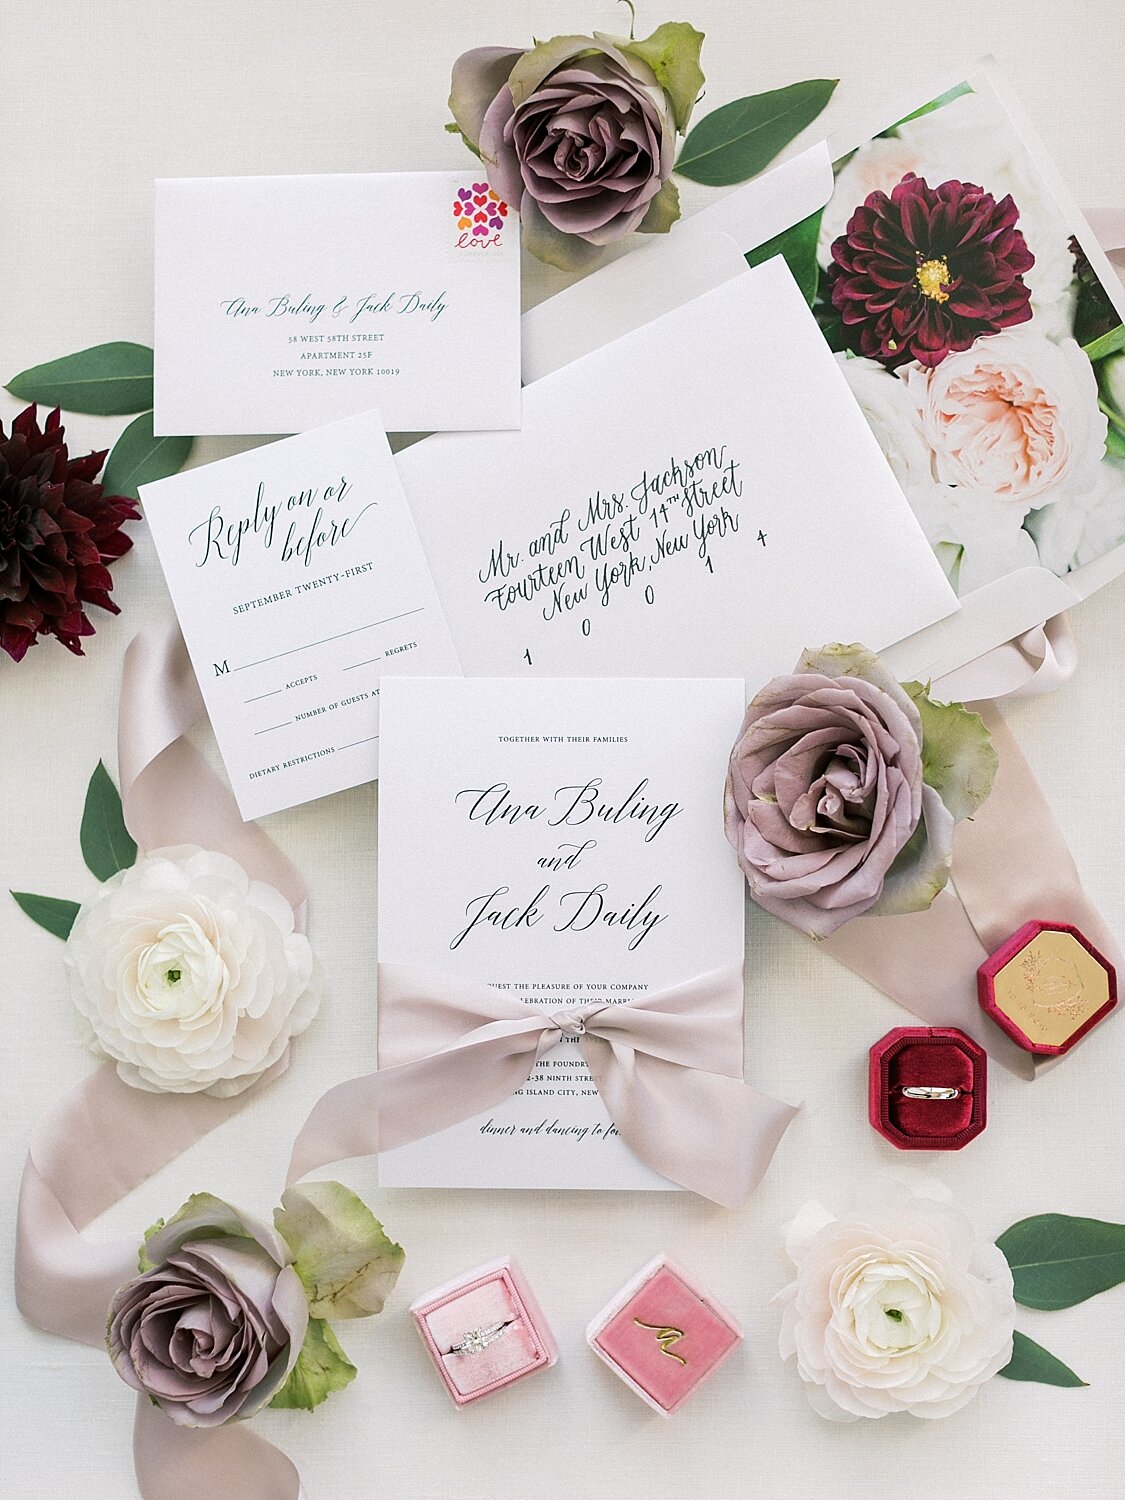 stationery for wedding from Shine Wedding Invitations by Asher Gardner Photography